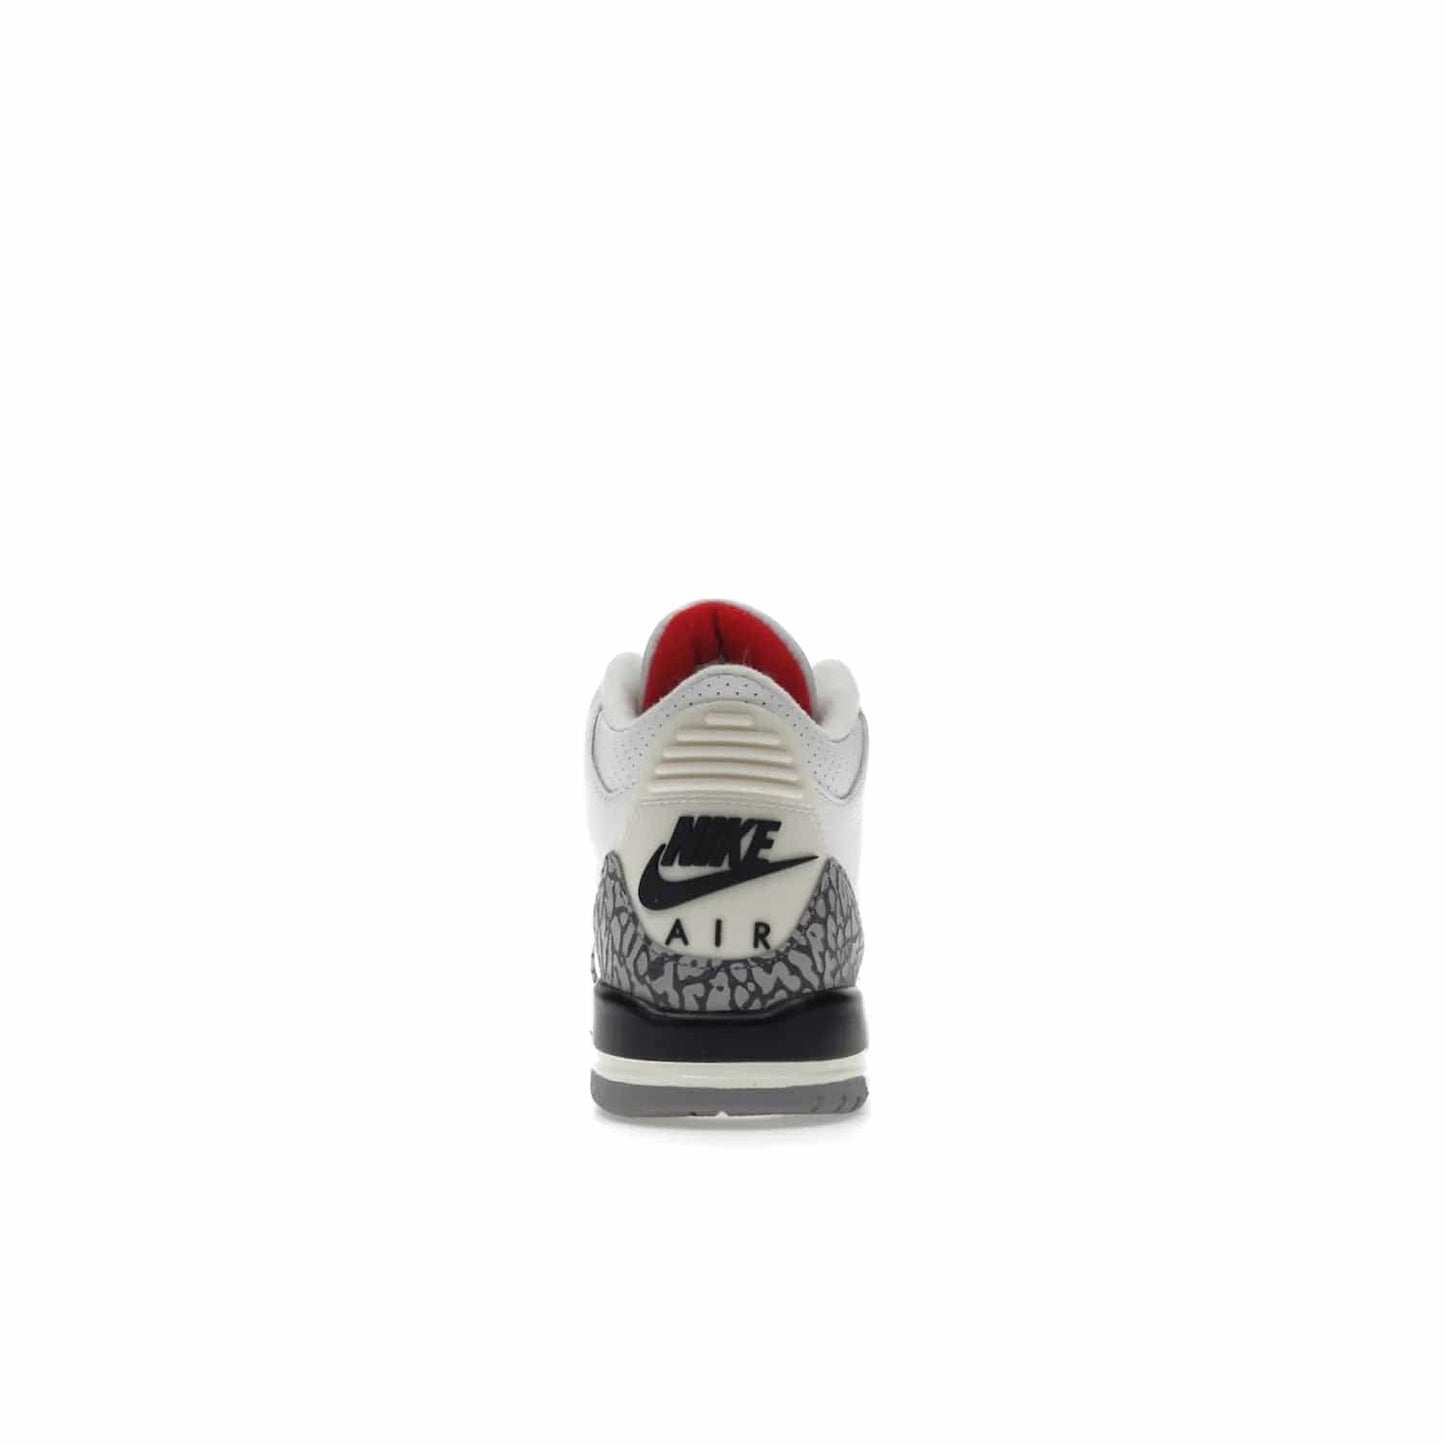 Jordan 3 Retro White Cement Reimagined (GS) - Image 28 - Only at www.BallersClubKickz.com - Grab the perfect blend of modern design and classic style with the Jordan 3 Retro White Cement Reimagined (GS). Features Summit White, Fire Red, Black, and Cement Grey colorway, iconic Jordan logo embroidered on the tongue, and “Nike Air” branding. Limited availability, get your pair before March 11th 2023.